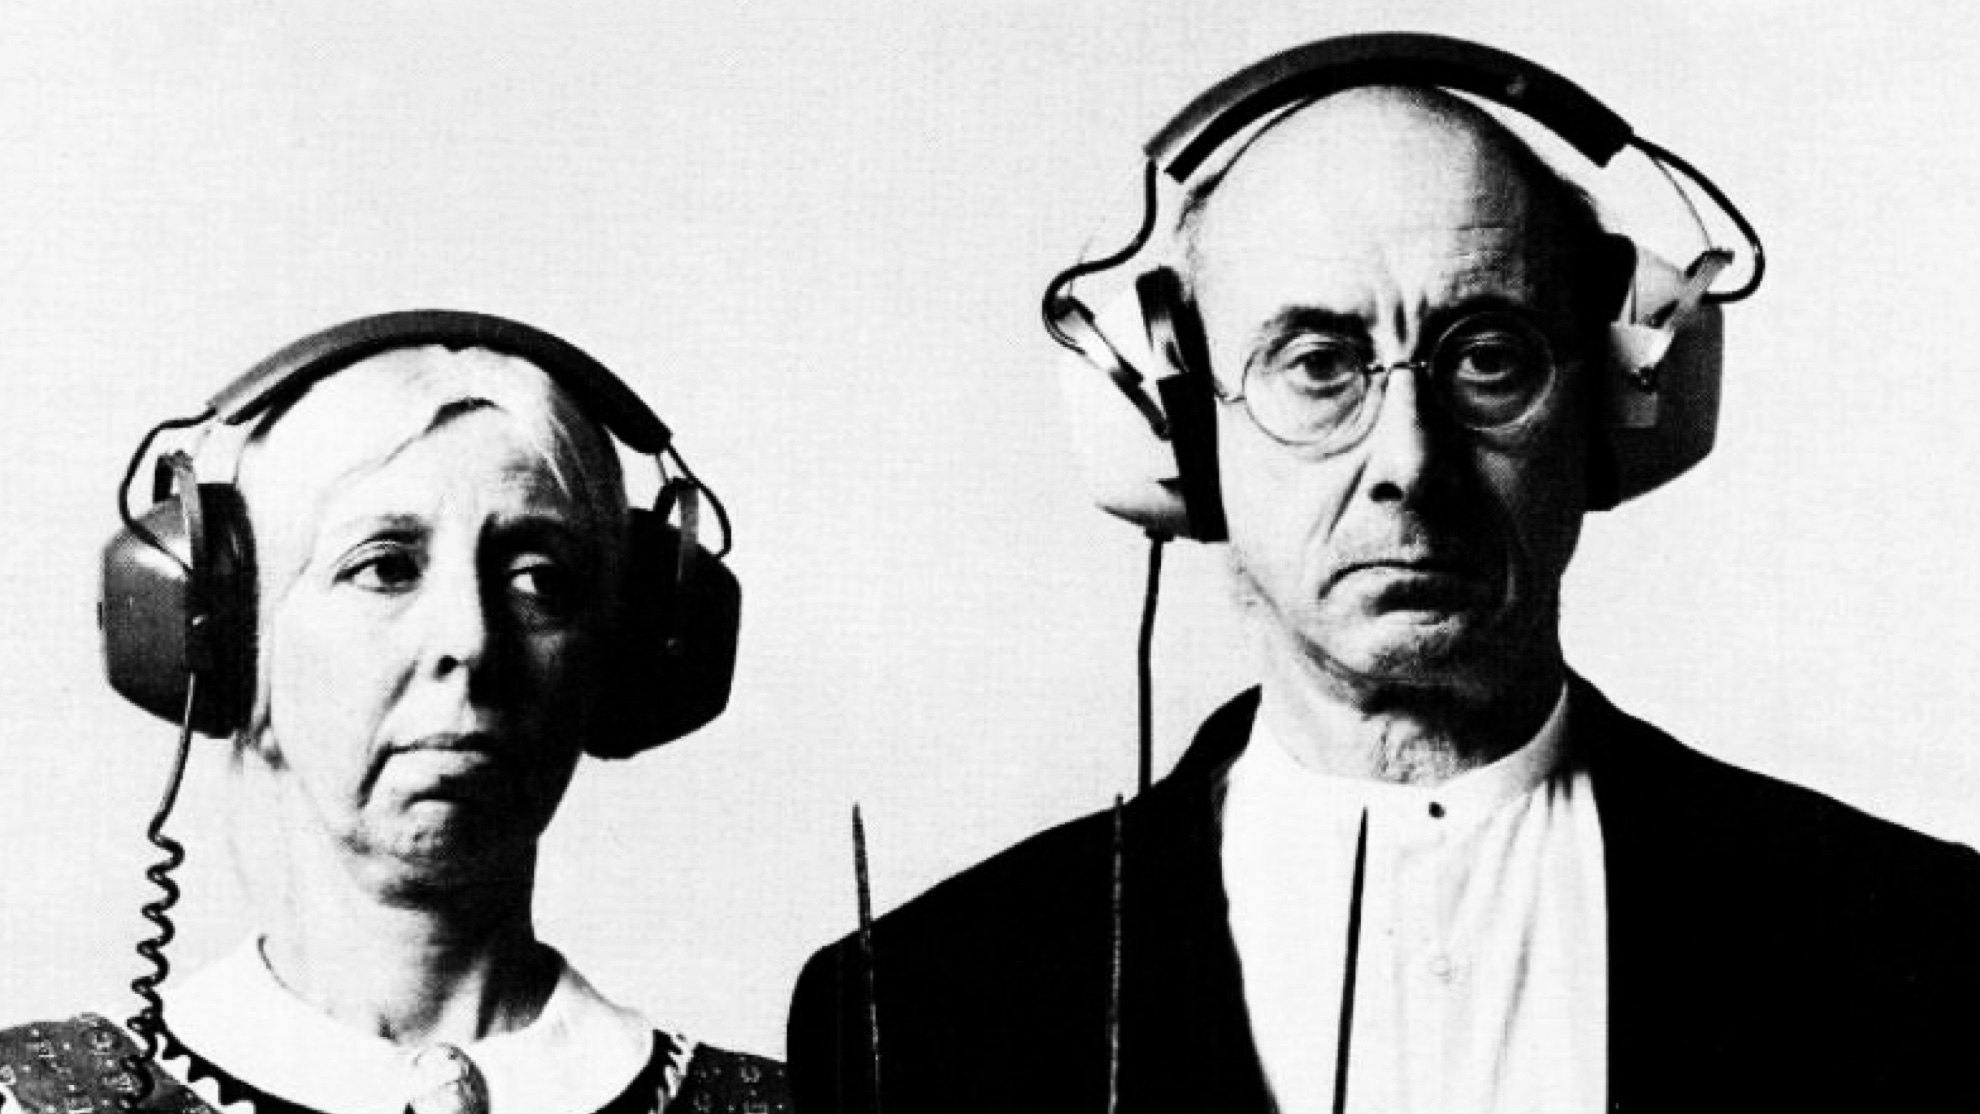 a 197s RCA advert showing two people wearing headphones